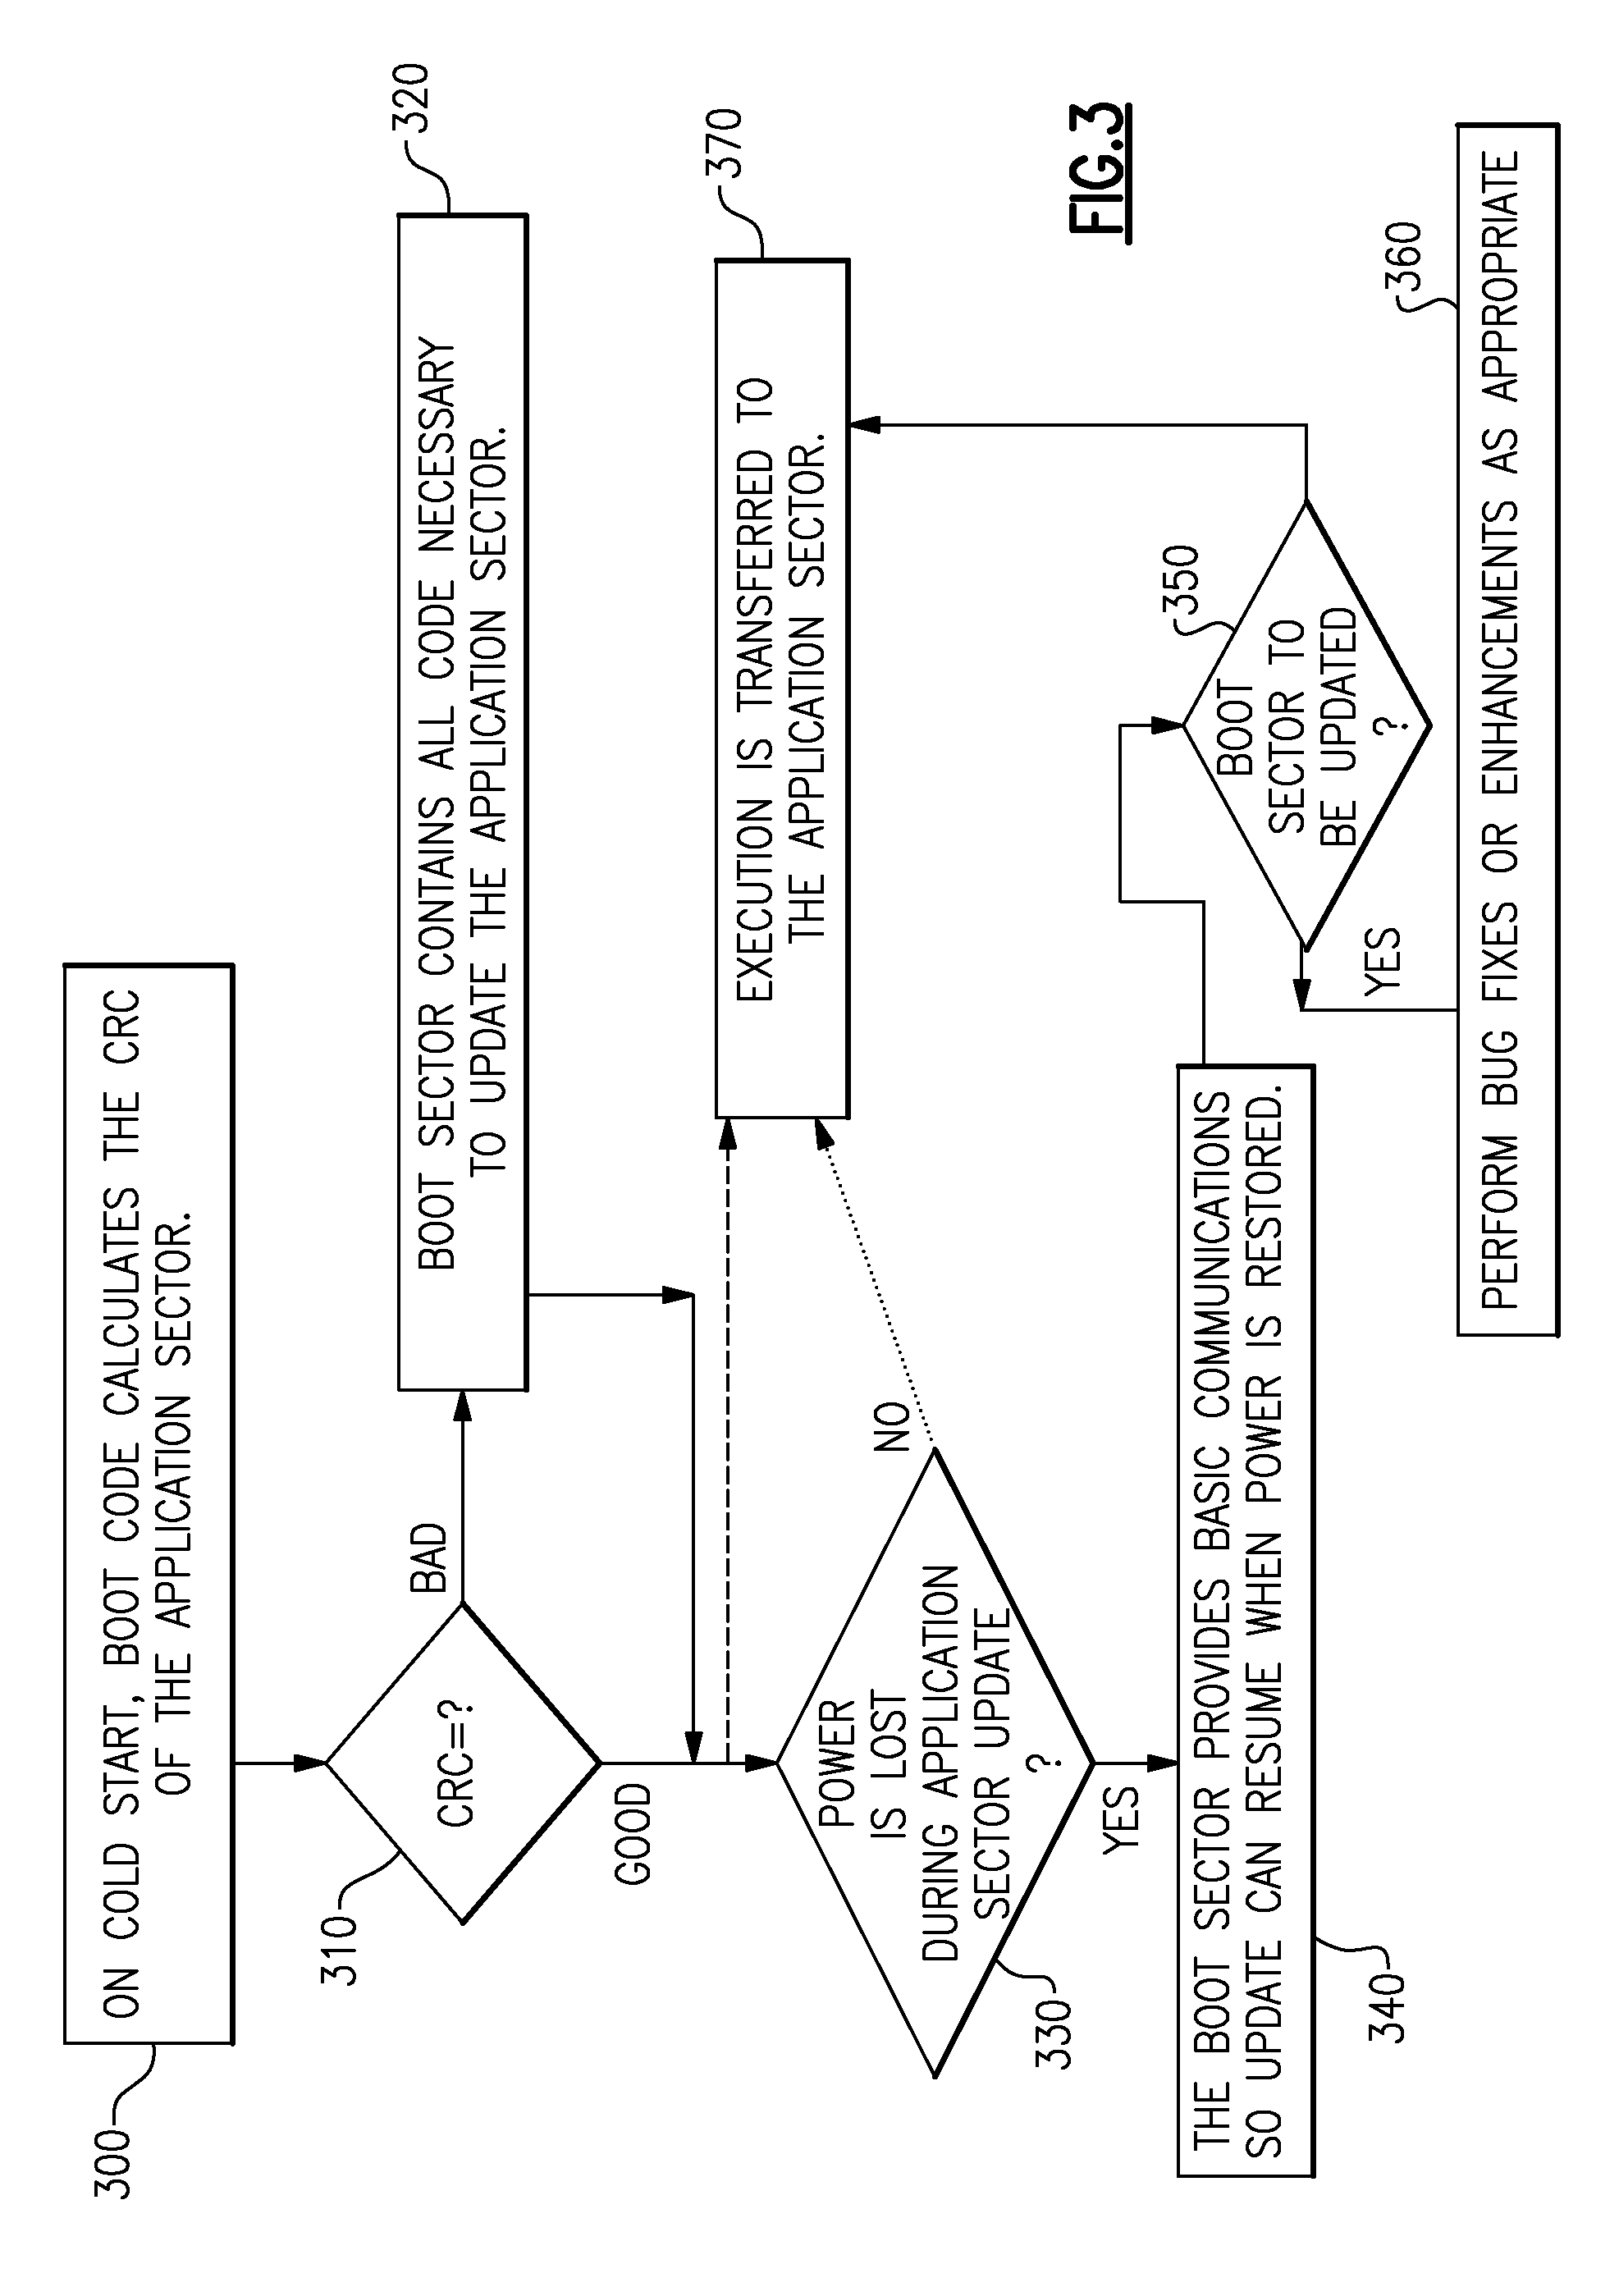 Reliably updating computer firmware while performing command and control functions on a power/thermal component in a high-availability, fault-tolerant, high-performance server